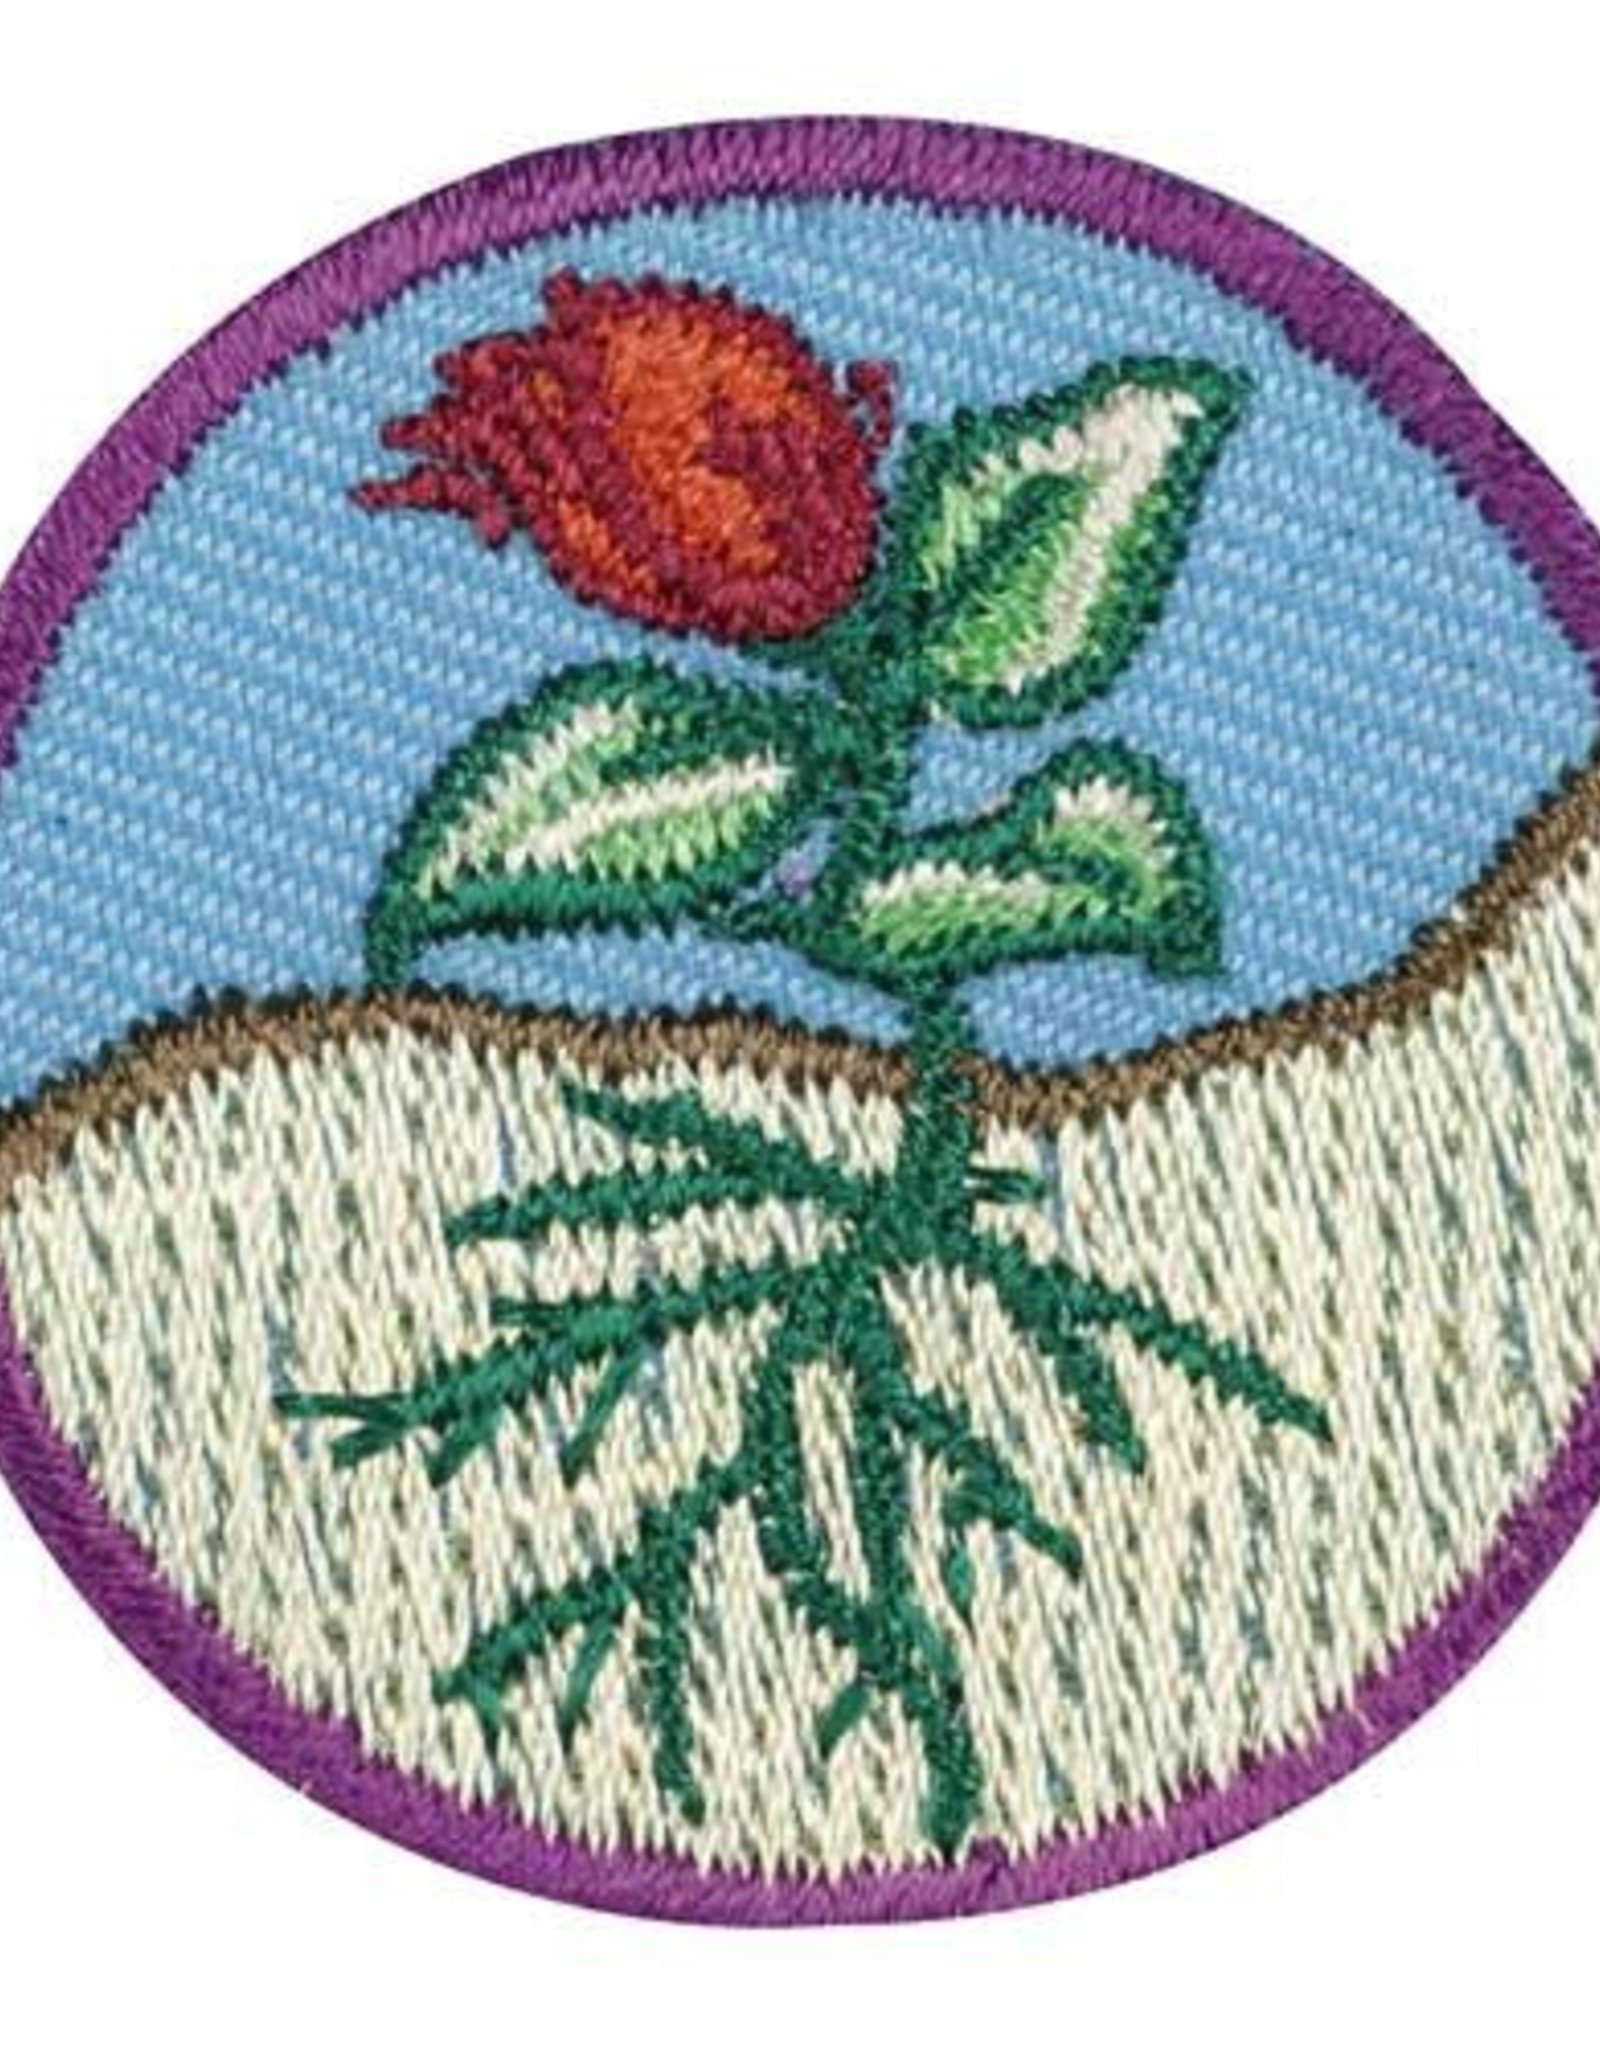 GIRL SCOUTS OF THE USA Junior Flowers Badge